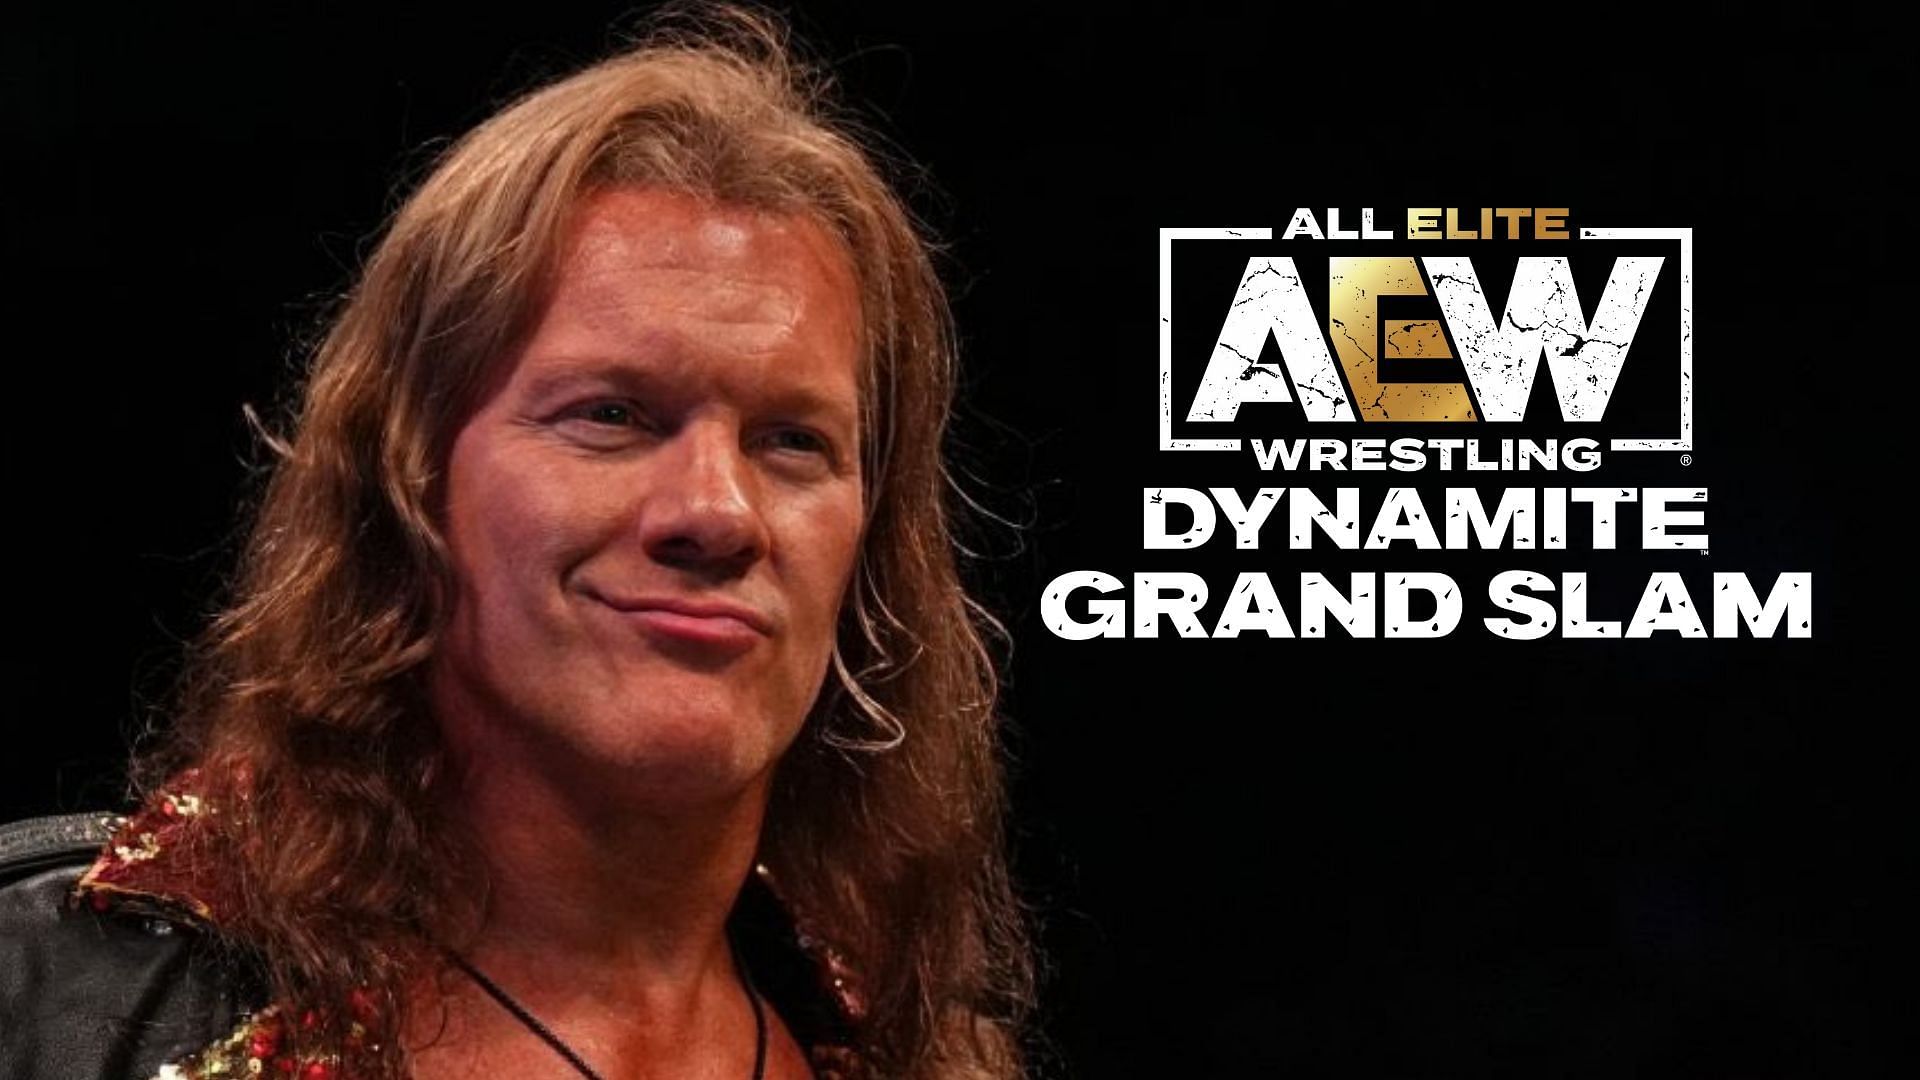 Chris Jericho will be in action at AEW Dynamite: Grand Slam